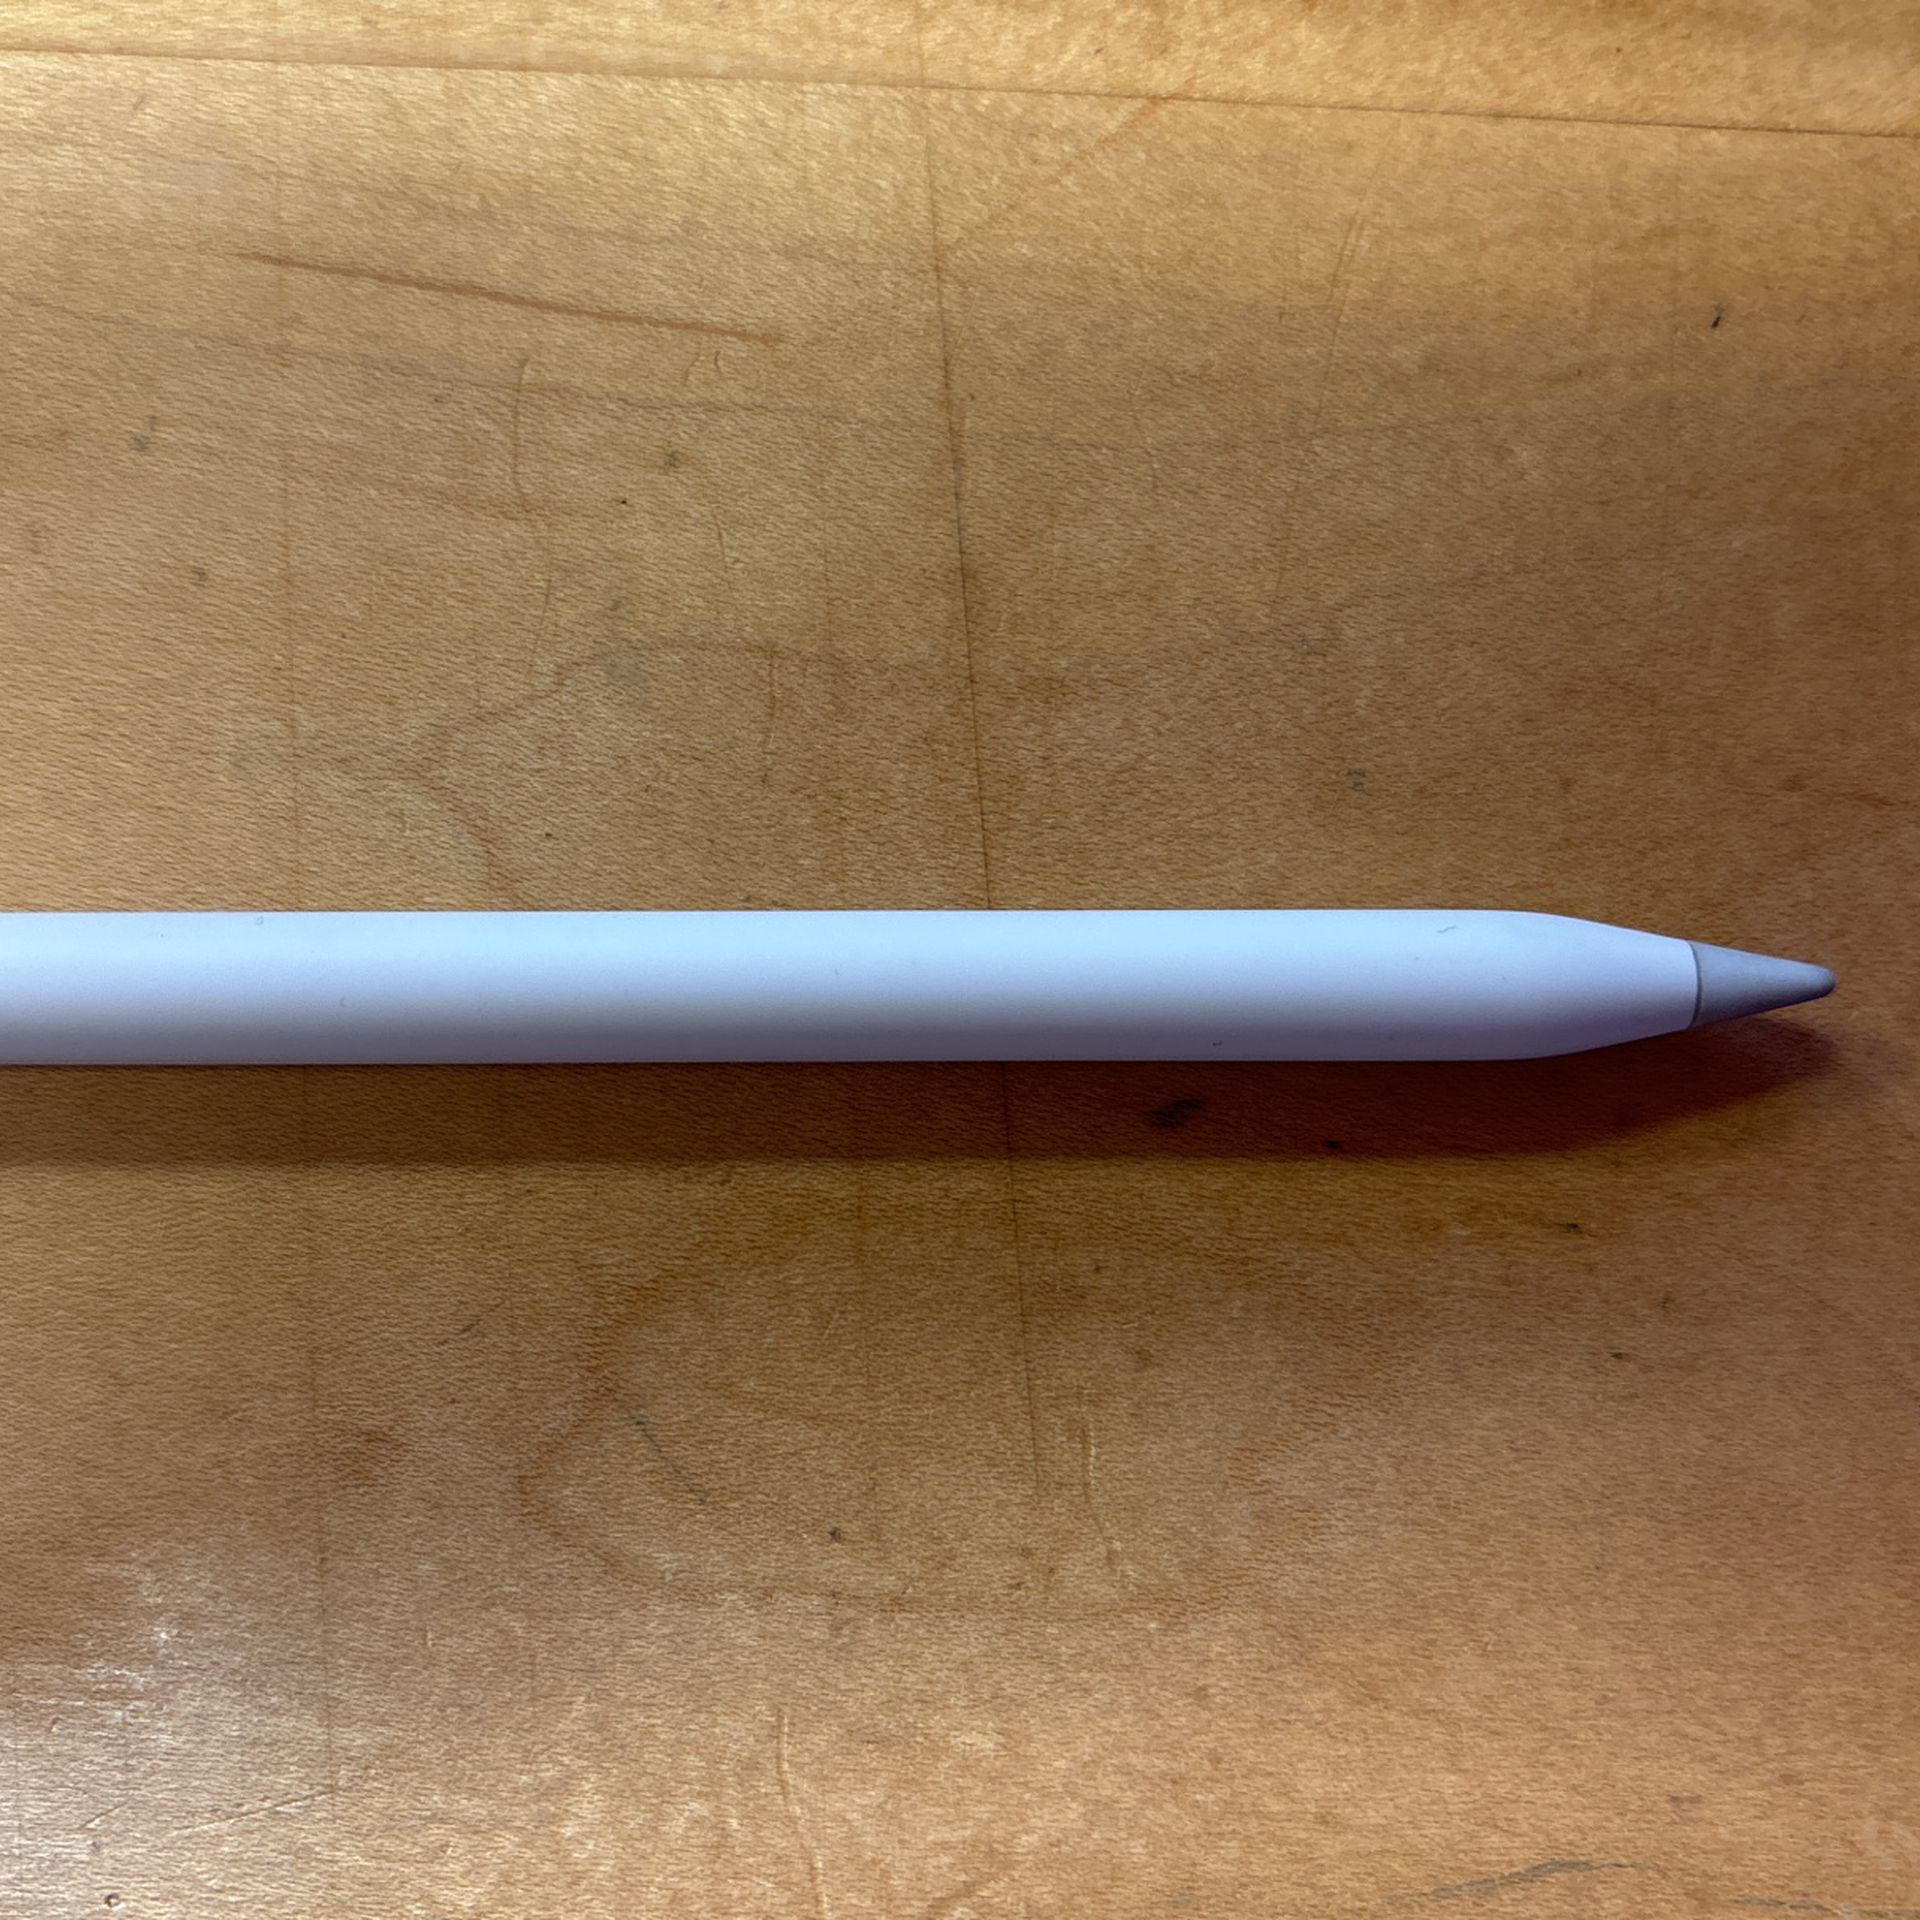 Apple Pencil 2nd Generation Open Boxed